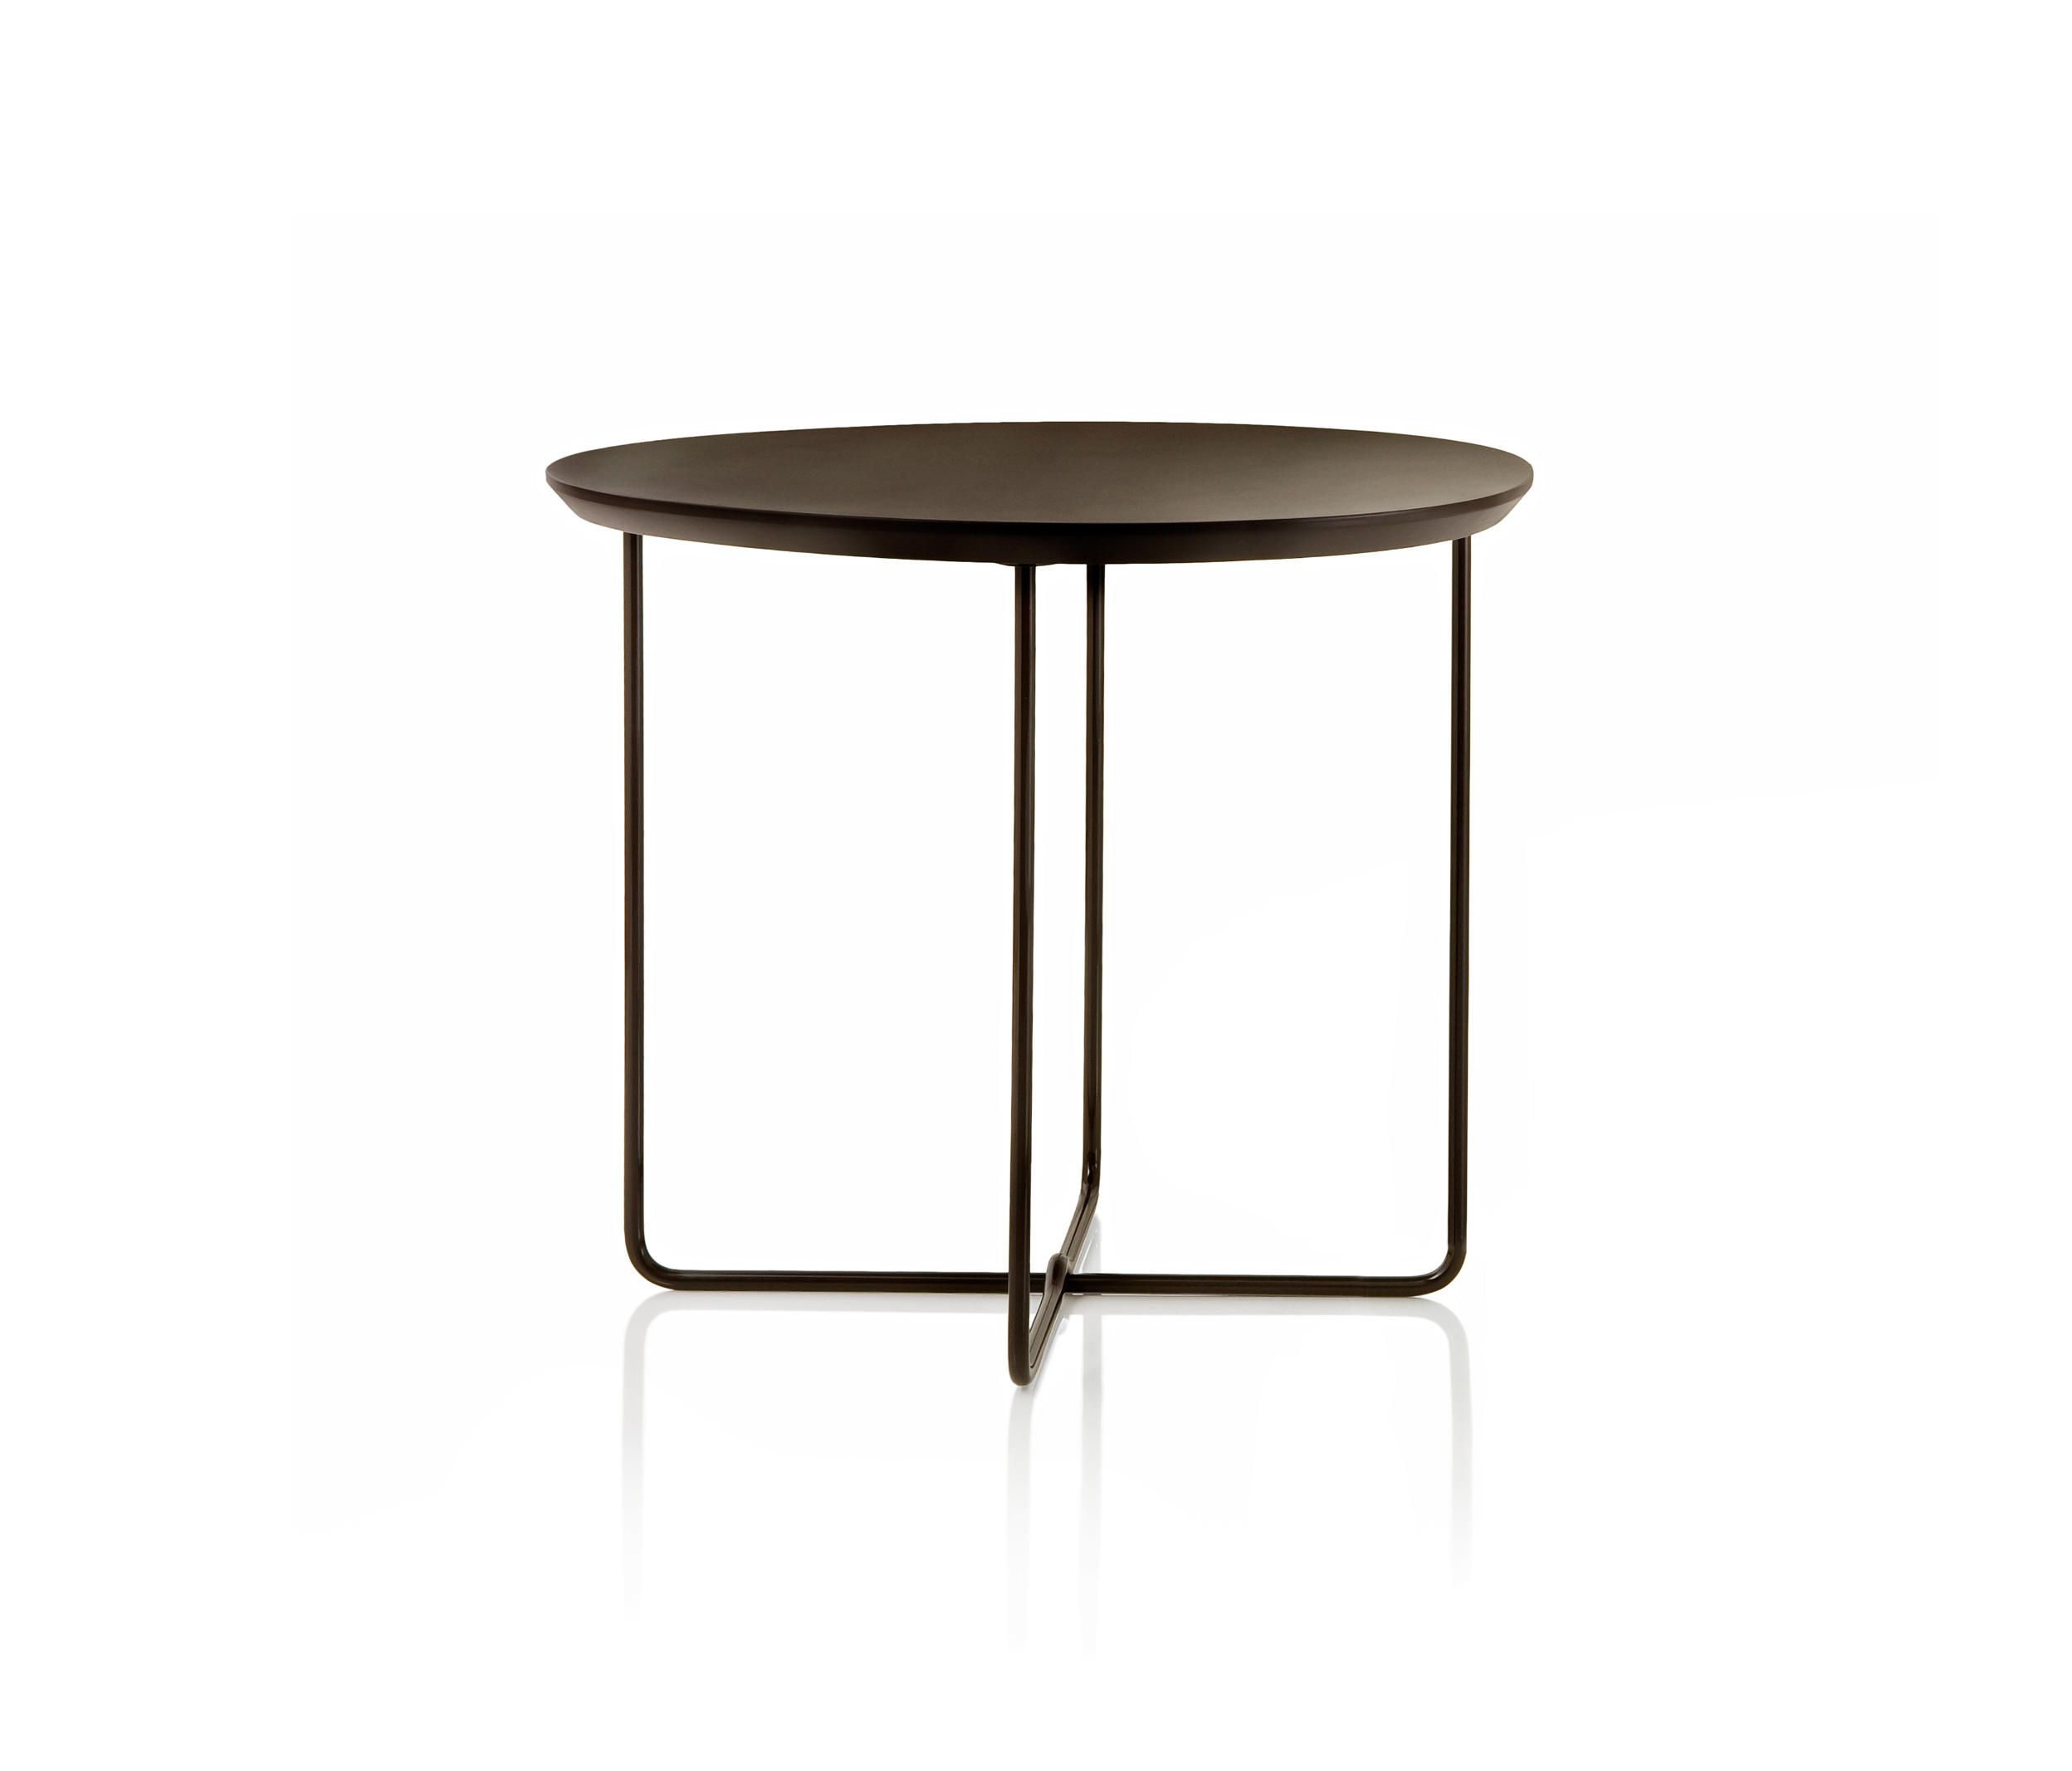 Clyde Coffee Table & Designer Furniture | Architonic With Regard To Current Clyde Round Bar Tables (Photo 6 of 25)